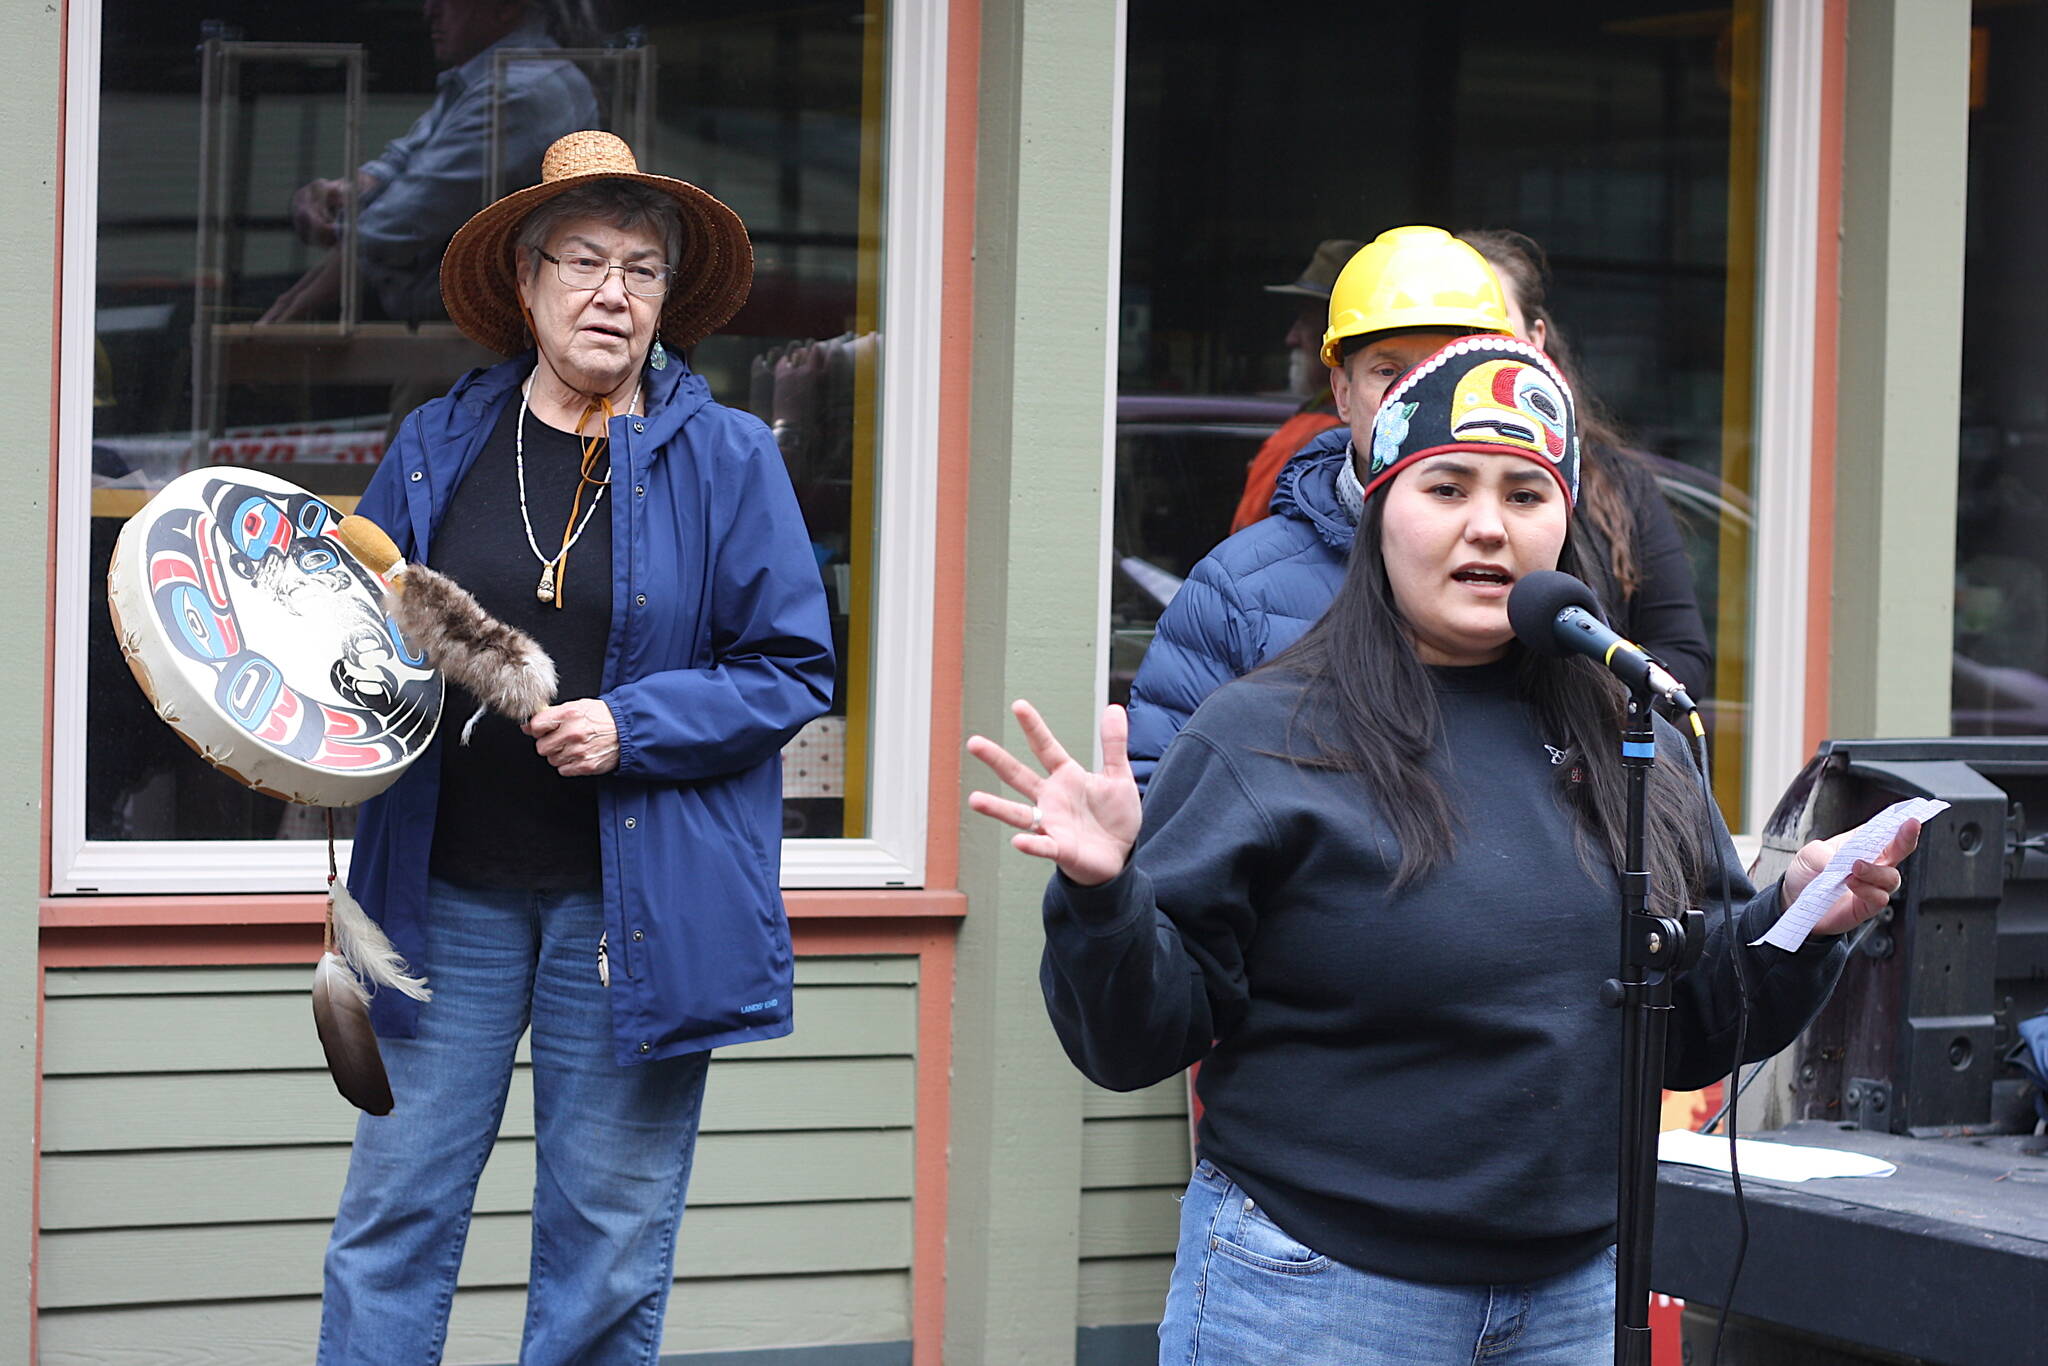 Rebekah Contreras, right, and Kashudoha Wanda Culp, both Hoonah residents, talk about the impacts of cruise ship tourism and other activities that are having climate and environmental impacts in their community during a climate change protest in downtown Juneau at midday Tuesday. (Mark Sabbatini / Juneau Empire)